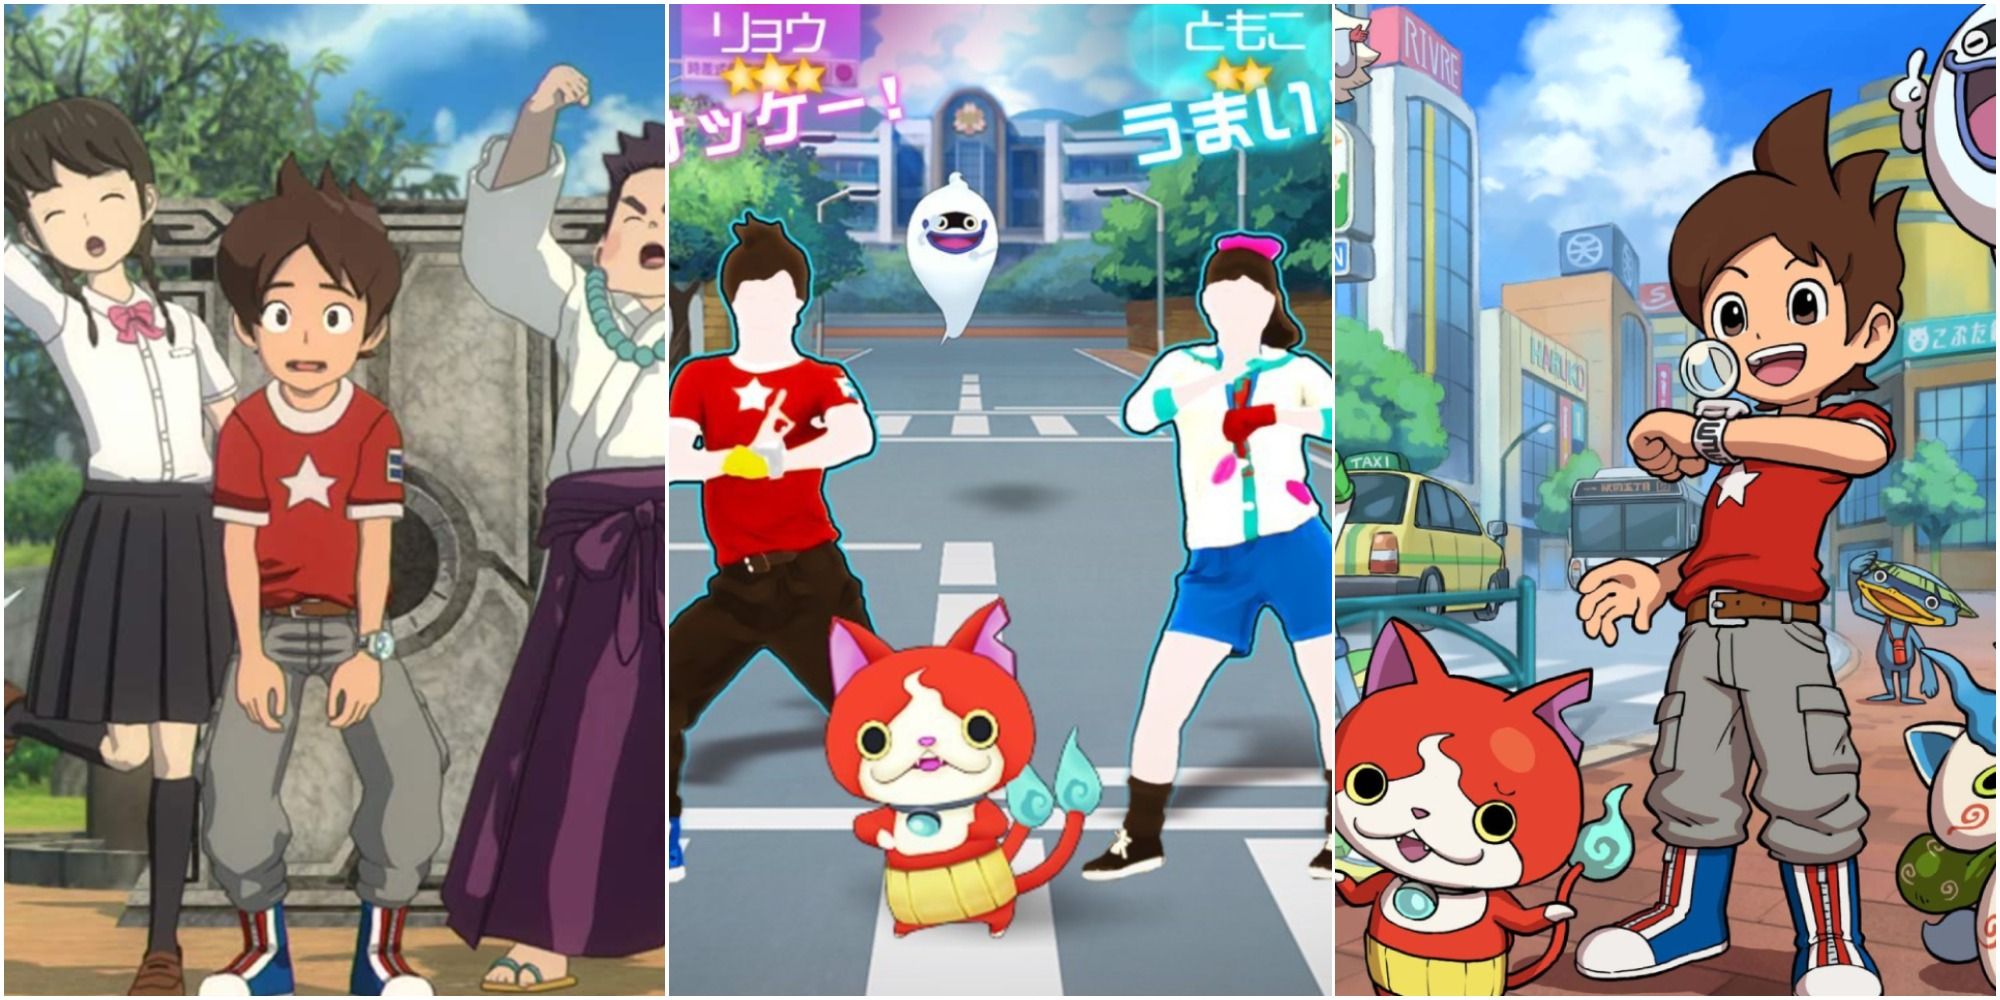 on the left is a screenshot from Yo-kai Watch 4, in the middle is a screenshot from Yo-kai Watch Dance, and on the right is promotional art for Yo-kai Watch